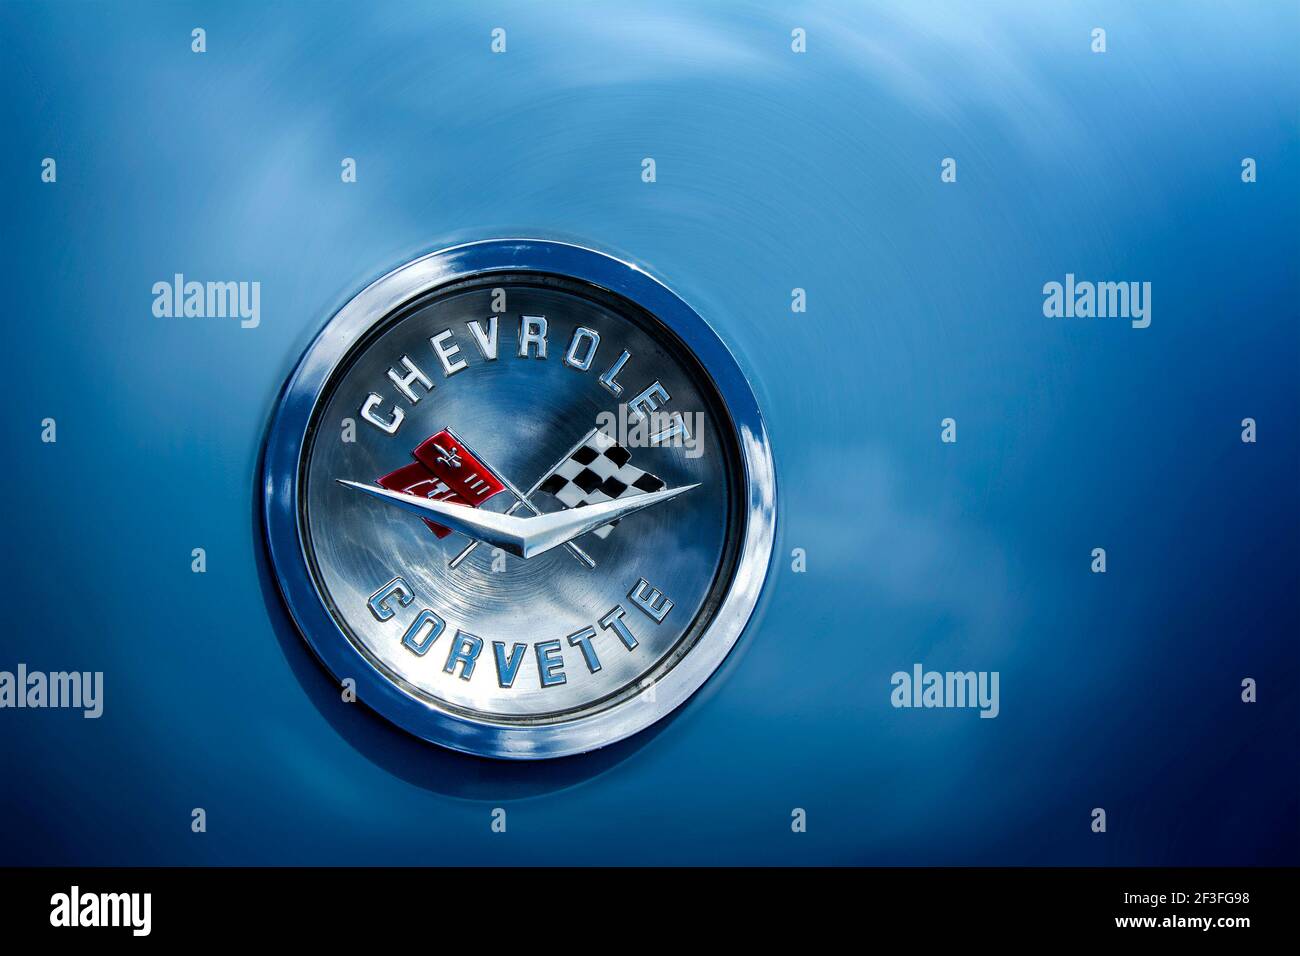 Chevrolet Corvette crossed flag emblem on blue vehicle with cloud reflection. Stock Photo